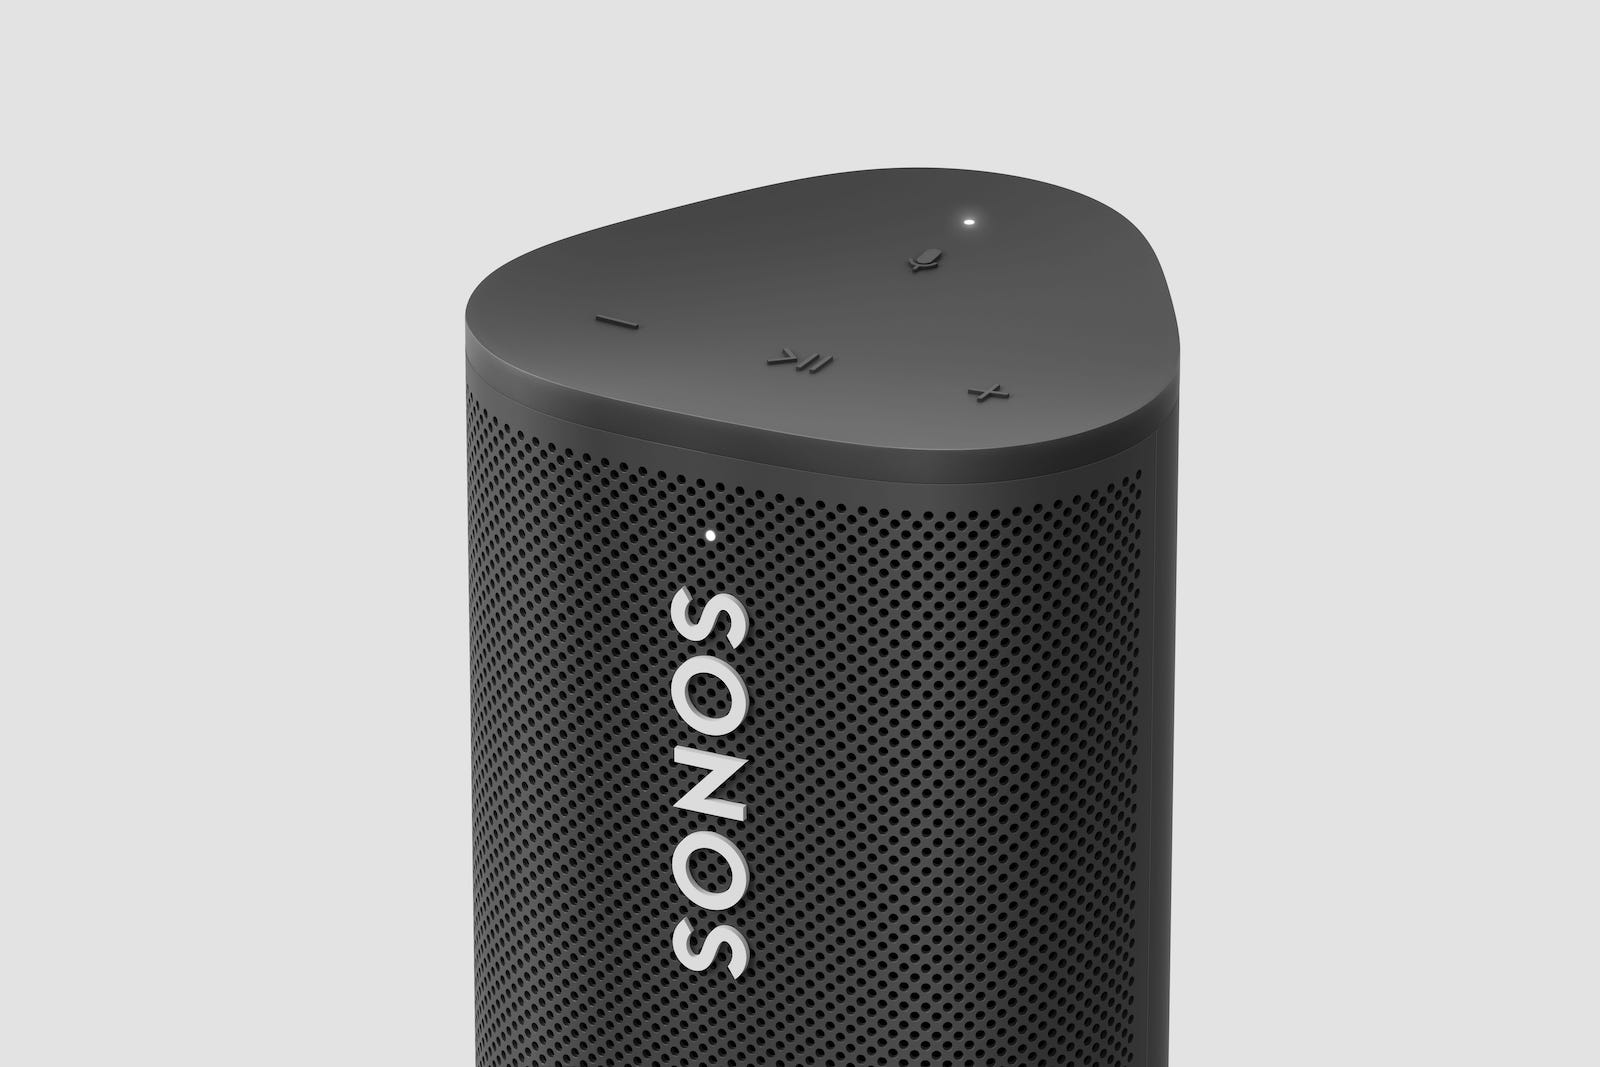 Sonos Unveils $169 Speaker AirPlay 2, Sound Swap, and More | MacRumors Forums